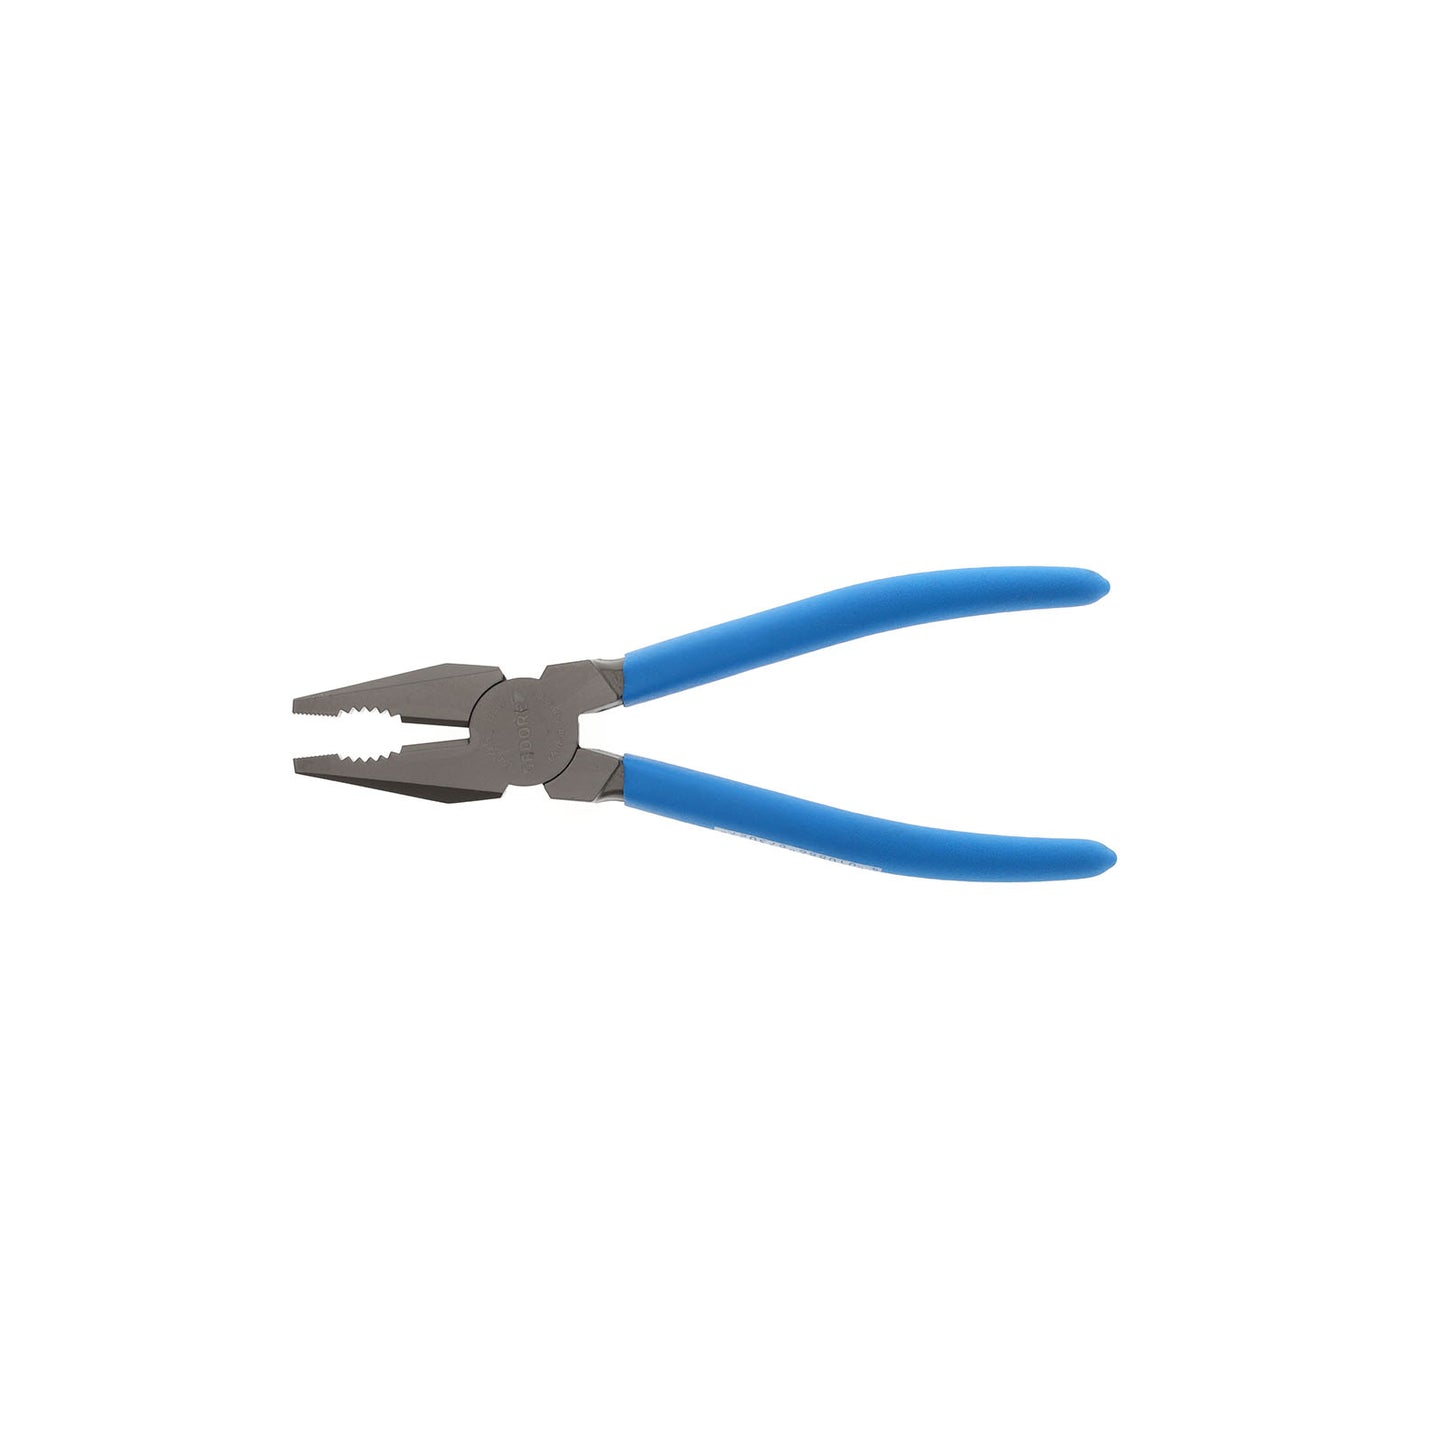 GEDORE 8245-180 TL - Universal pliers 180 mm (6730210)